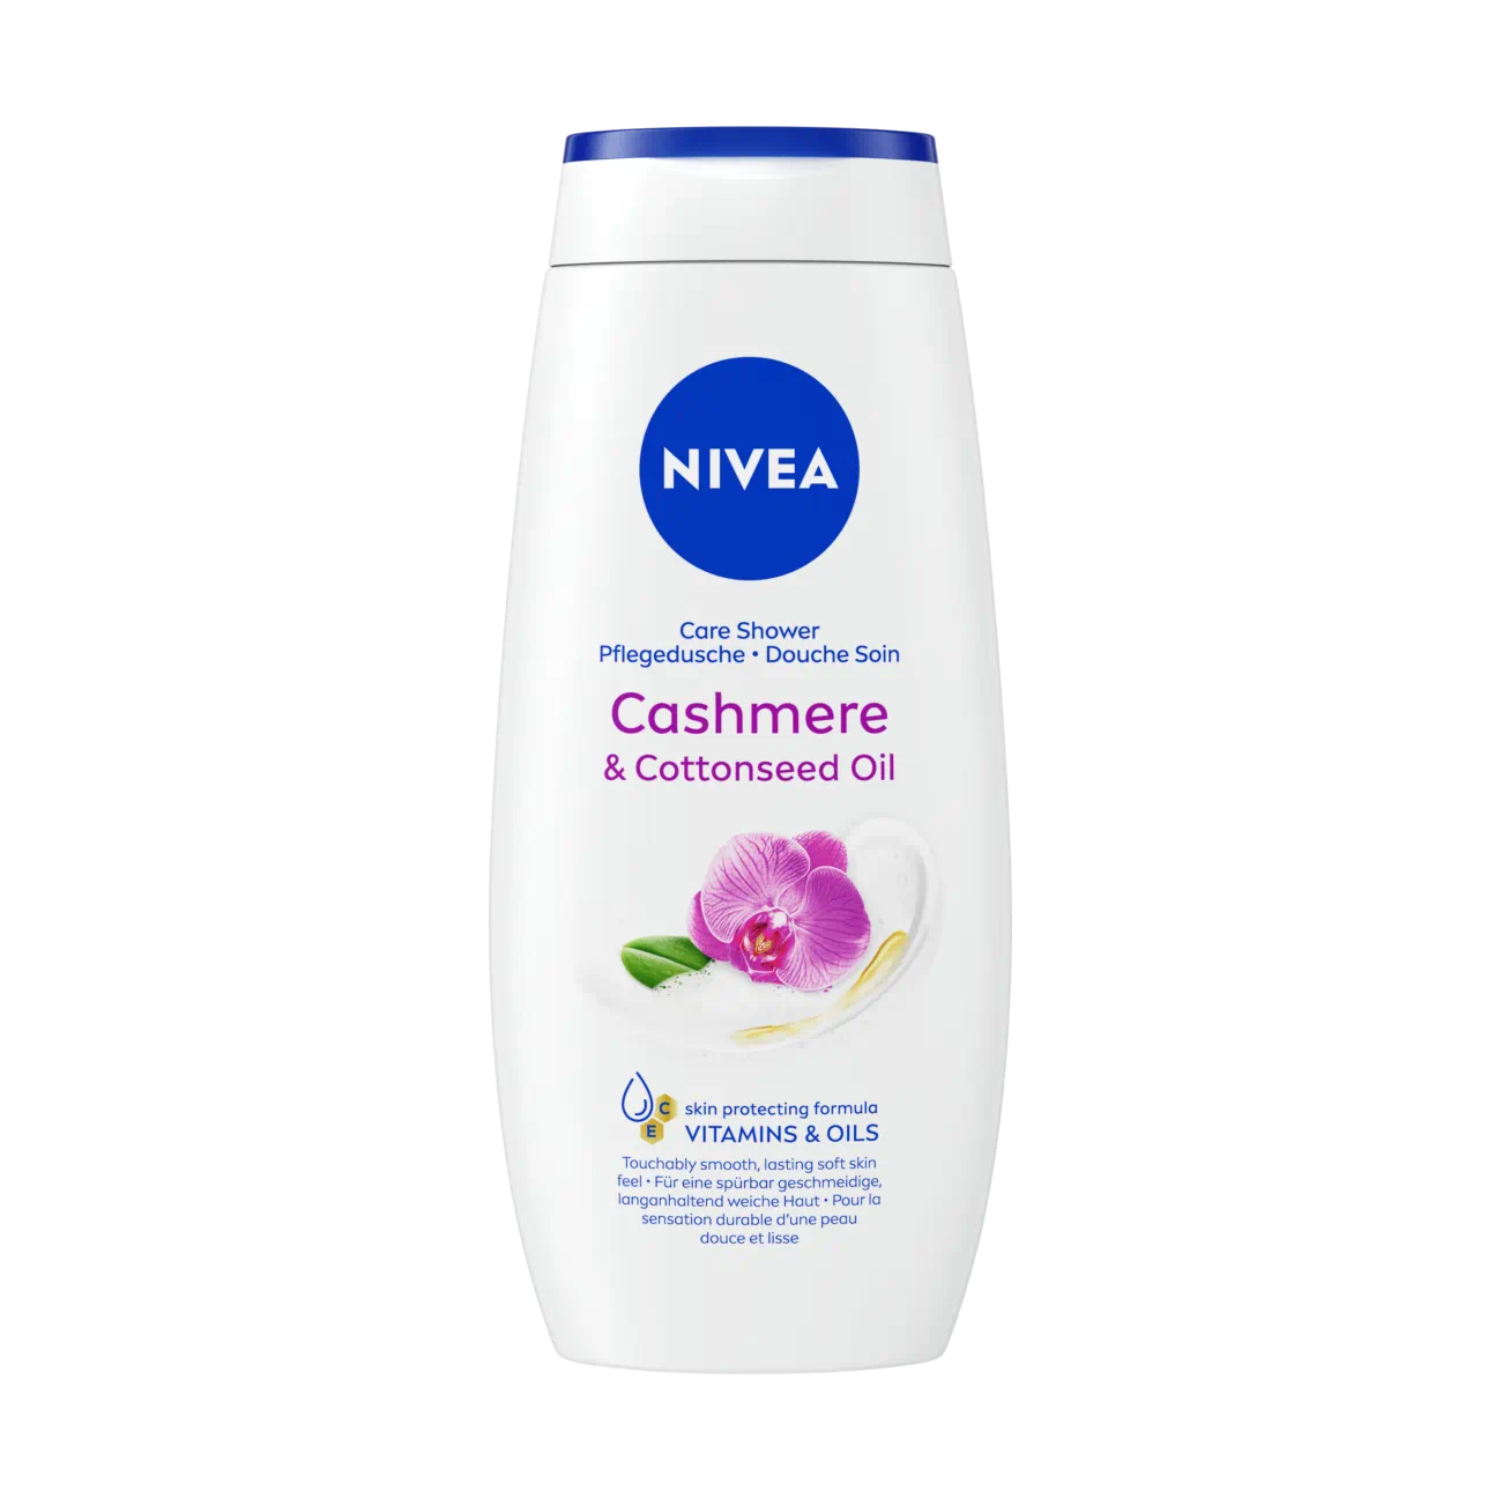 nivea-care-shower-cashmere-cottonseed-oil-germany-germany-250ml